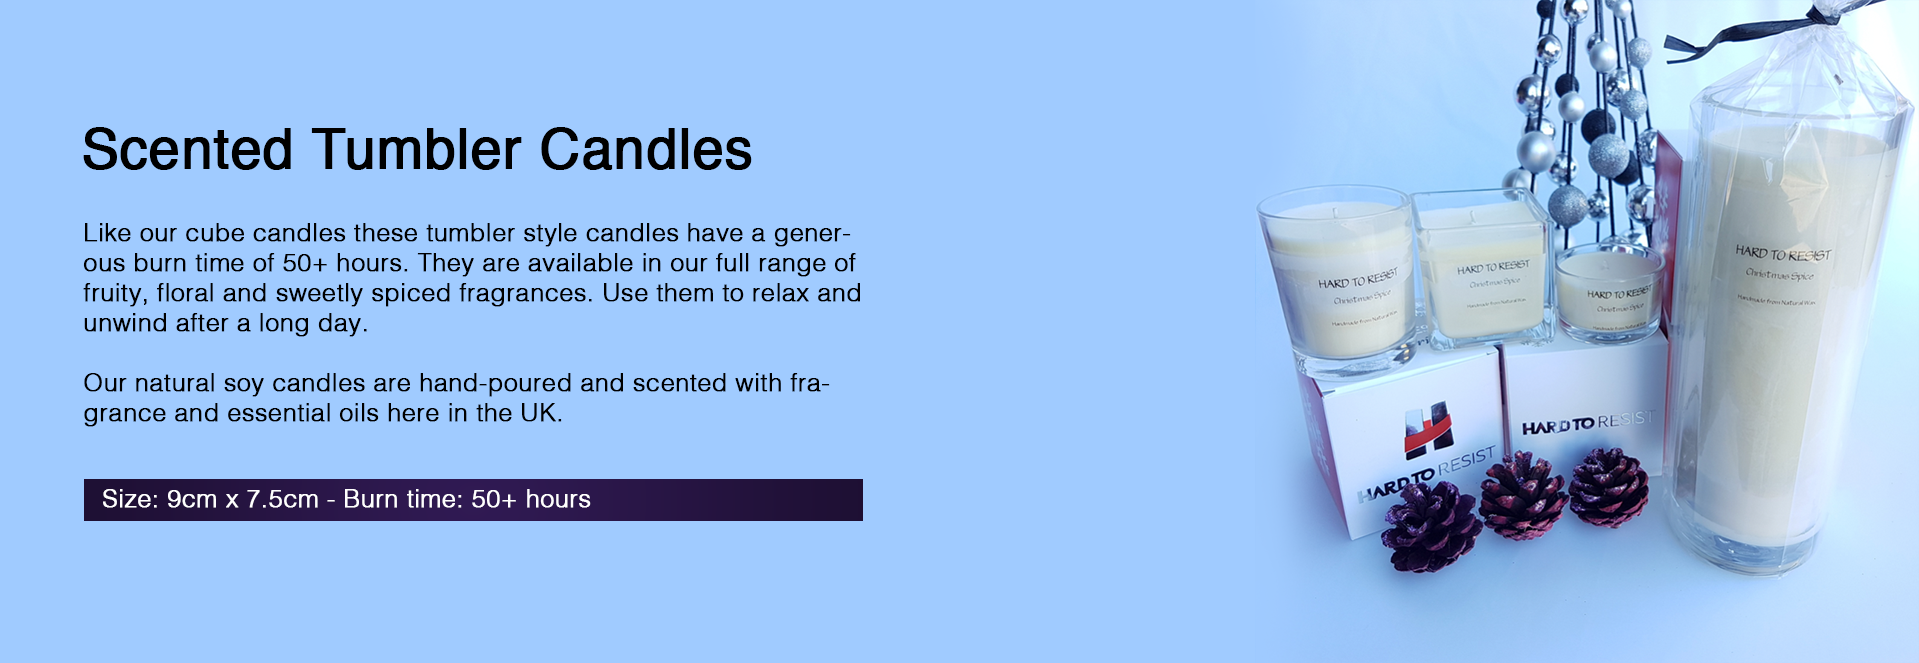 Scented Tumbler Candles